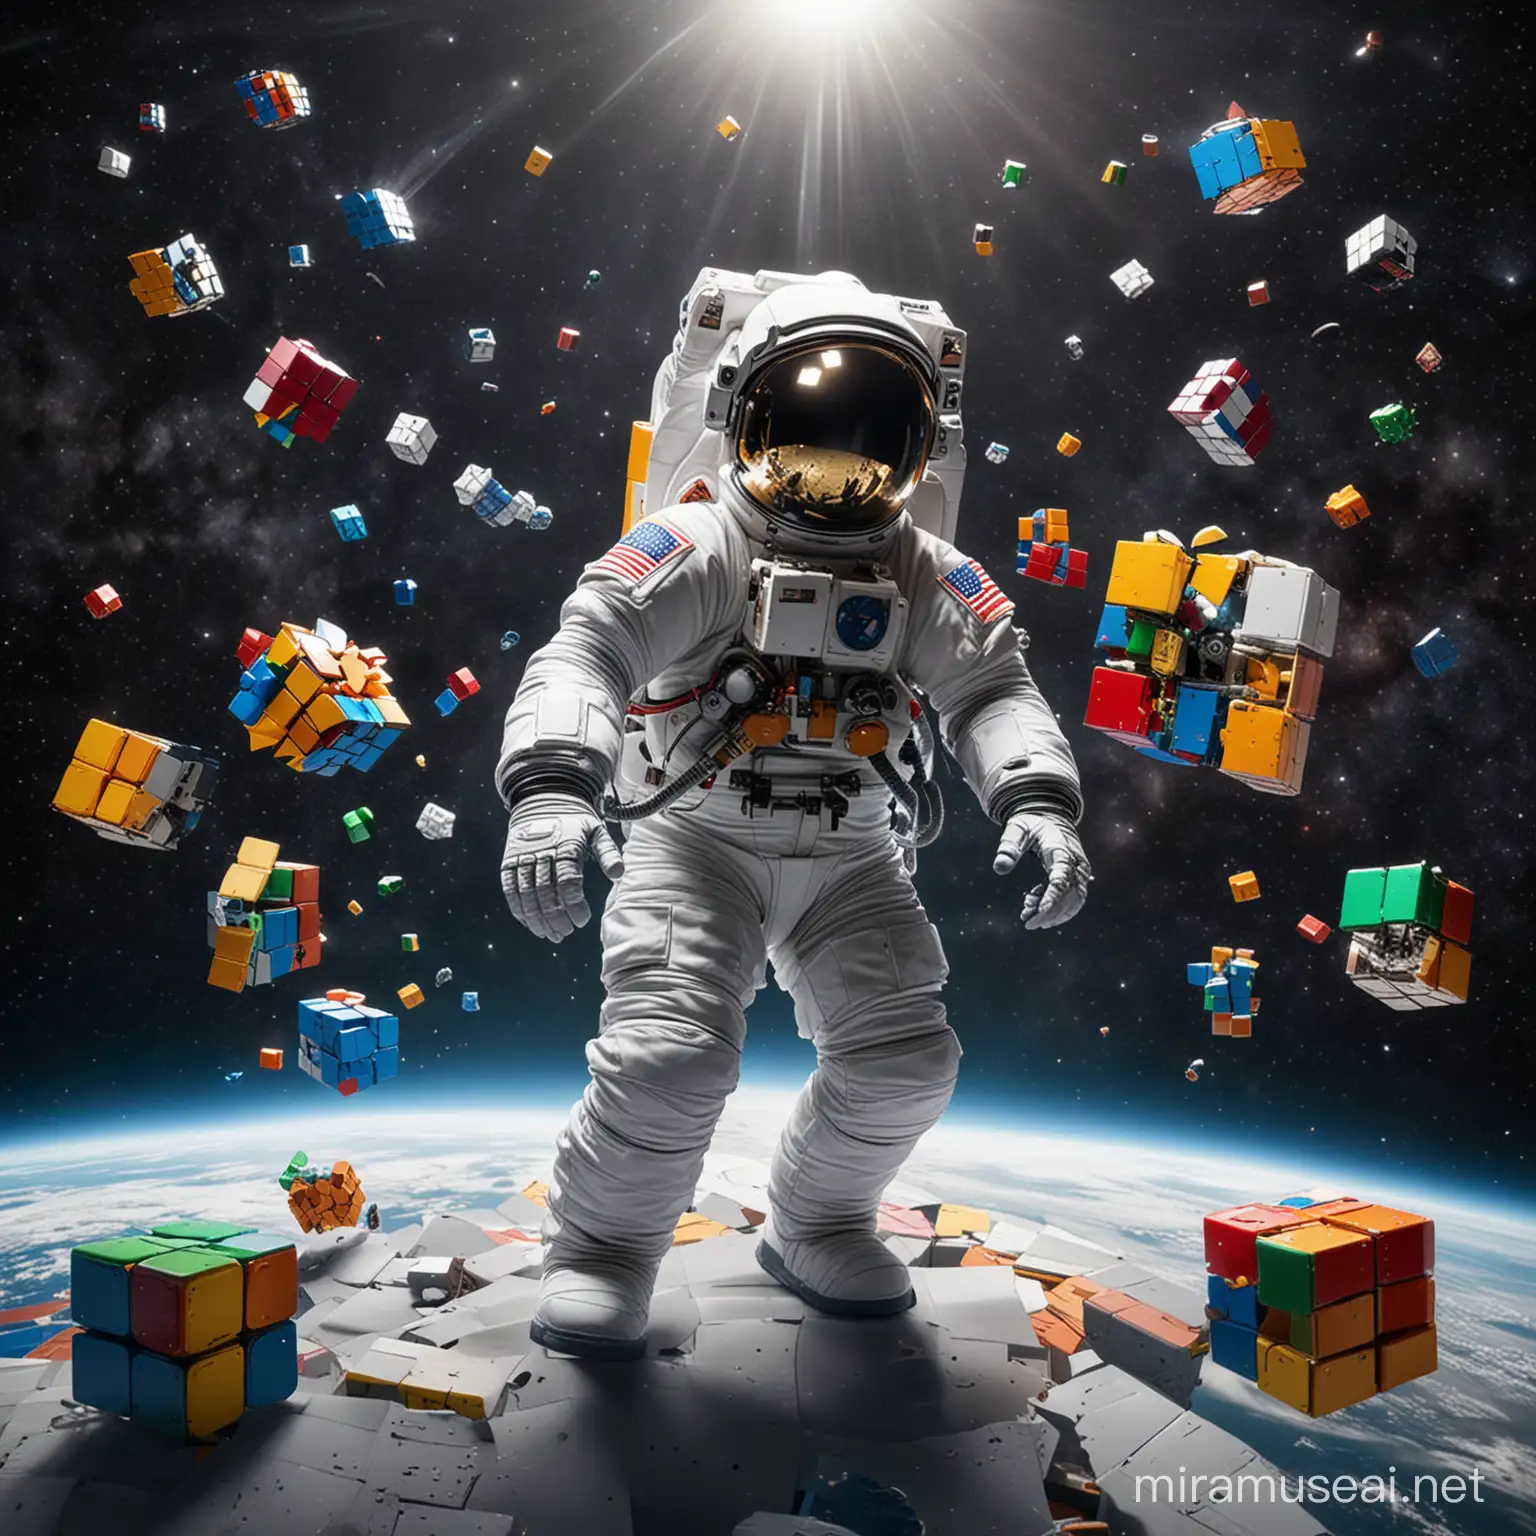 Toy Astronaut Adventure with Real Rubiks Cubes in Outer Space